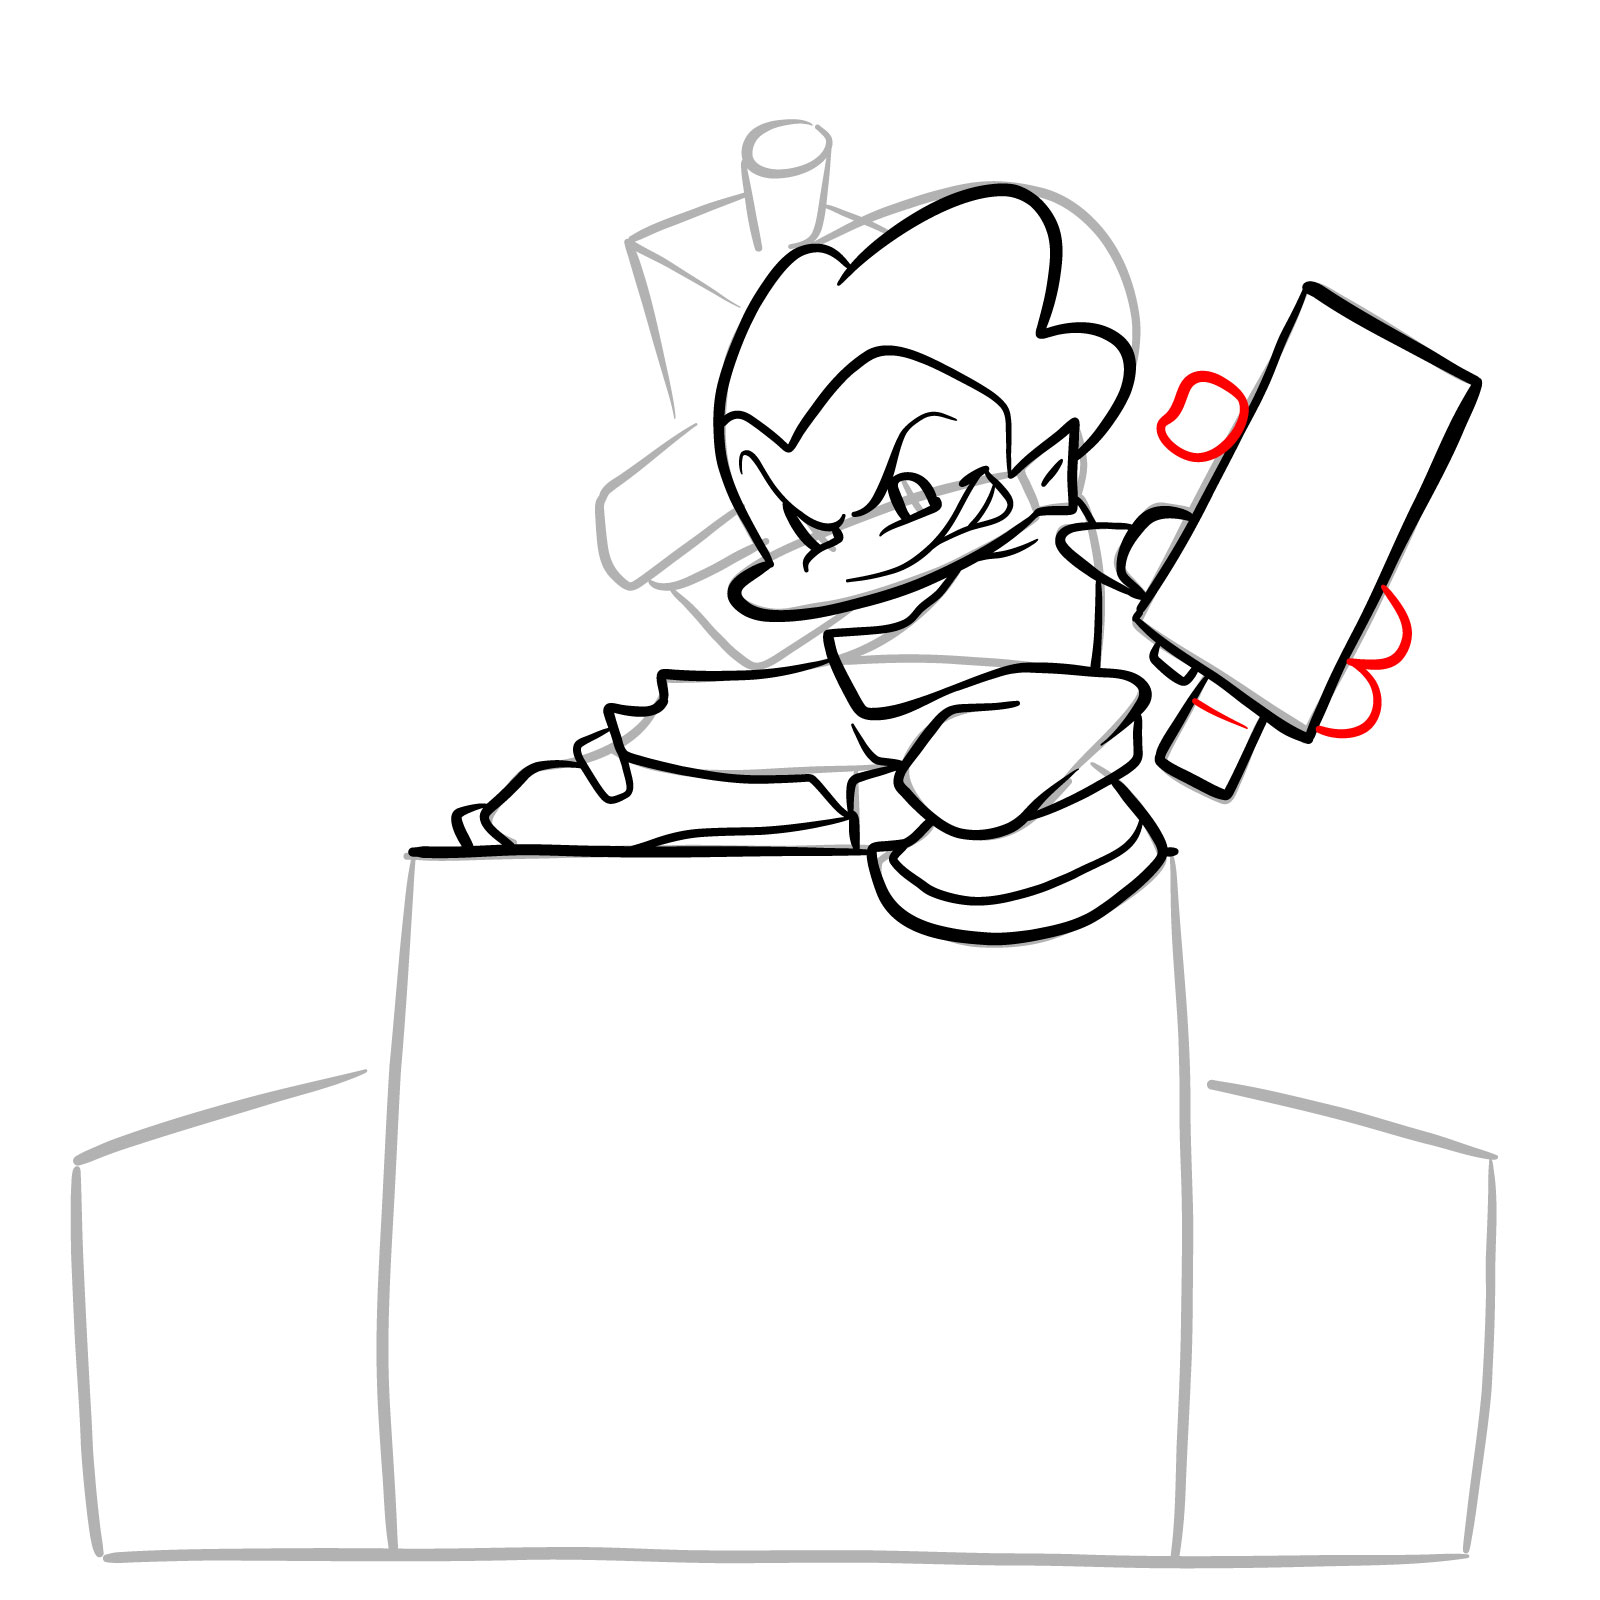 How to draw Pico on the speakers - step 18